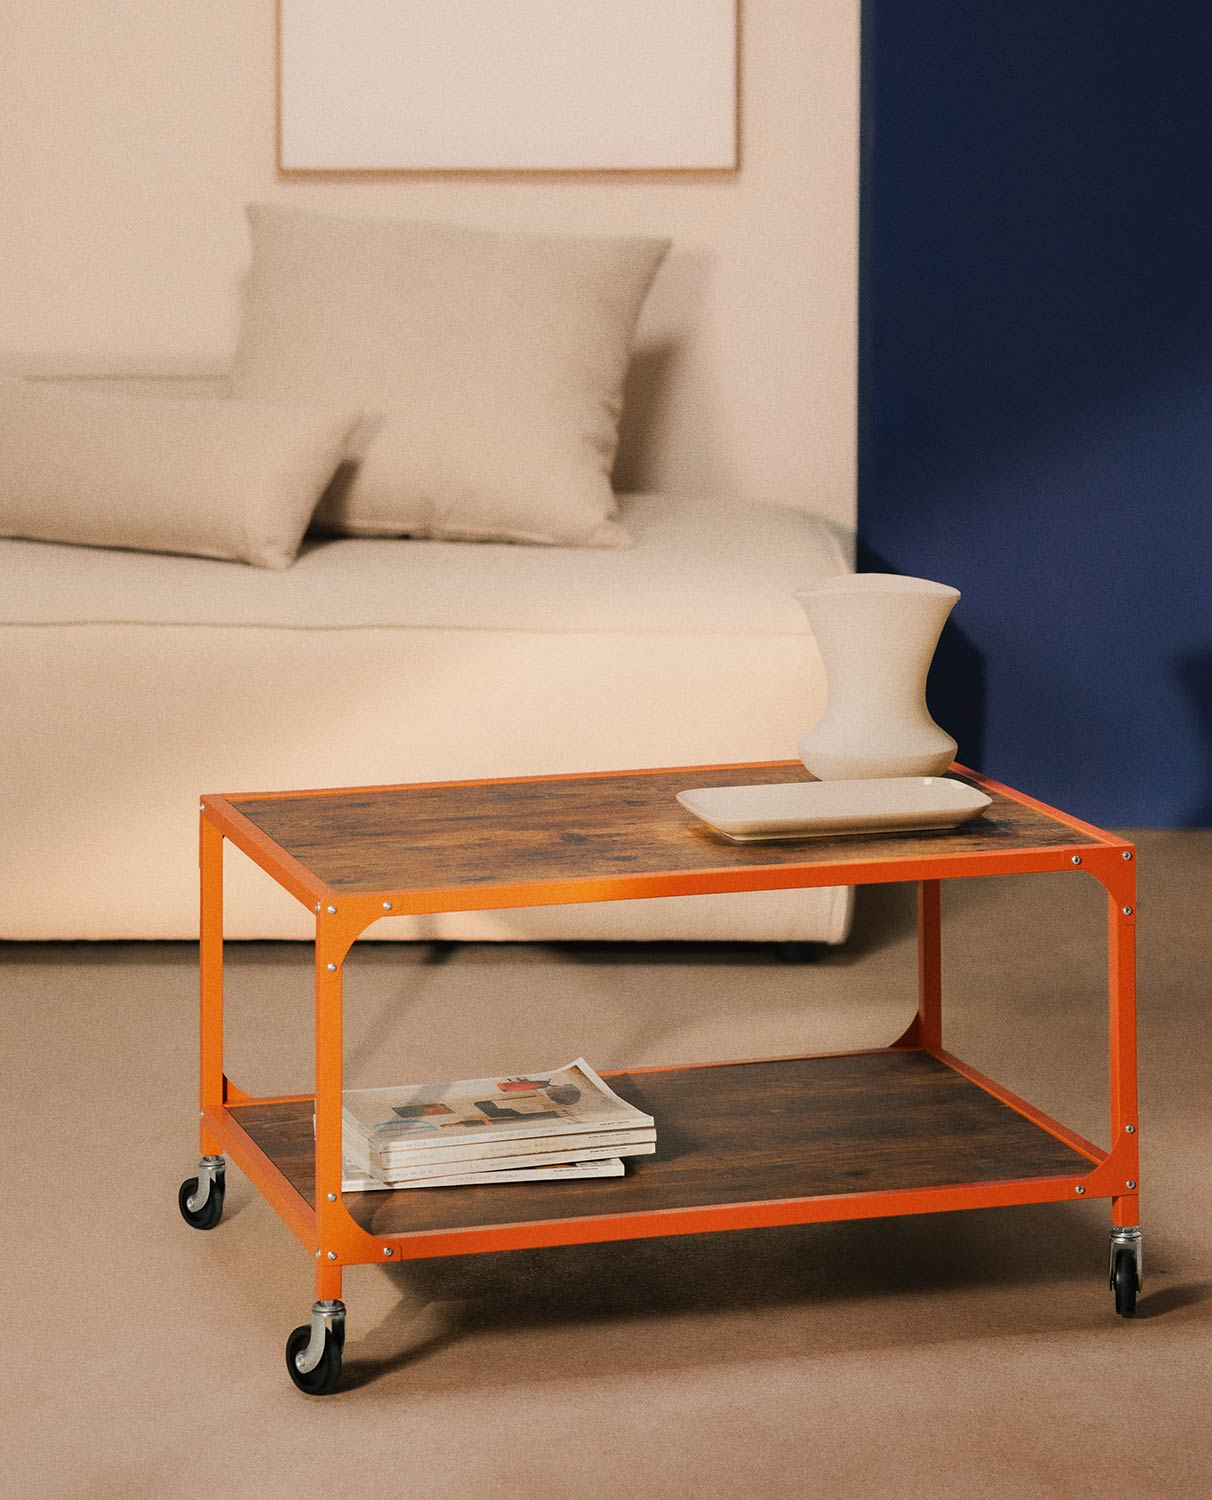 Steel and Wood Coffee Table with Wheels (55x80) Roda, gallery image 2